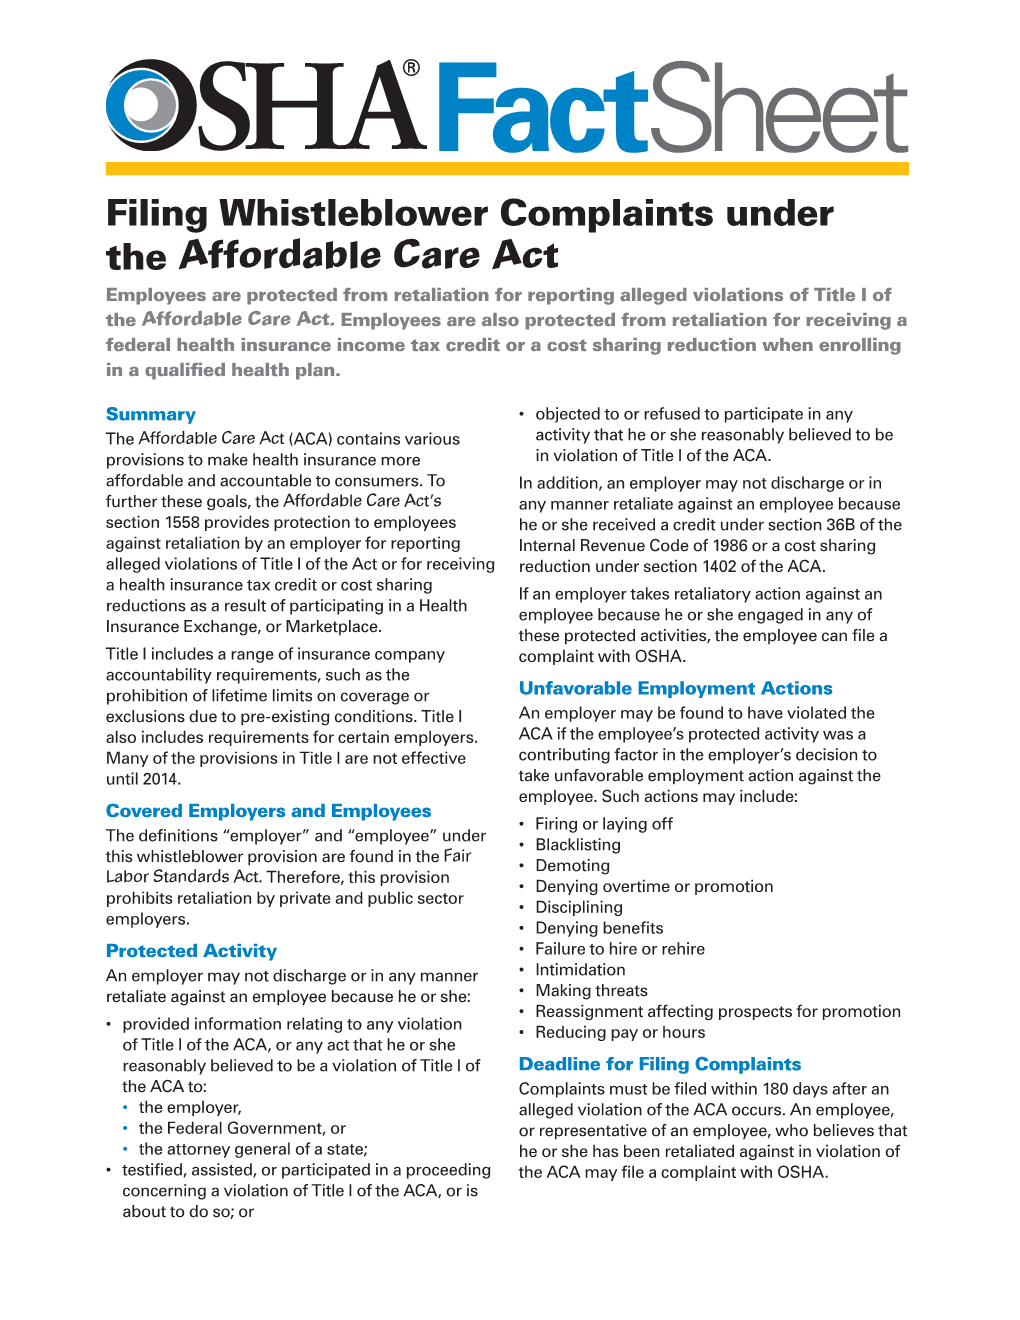 Filing Whistleblower Complaints Under the Affordable Care